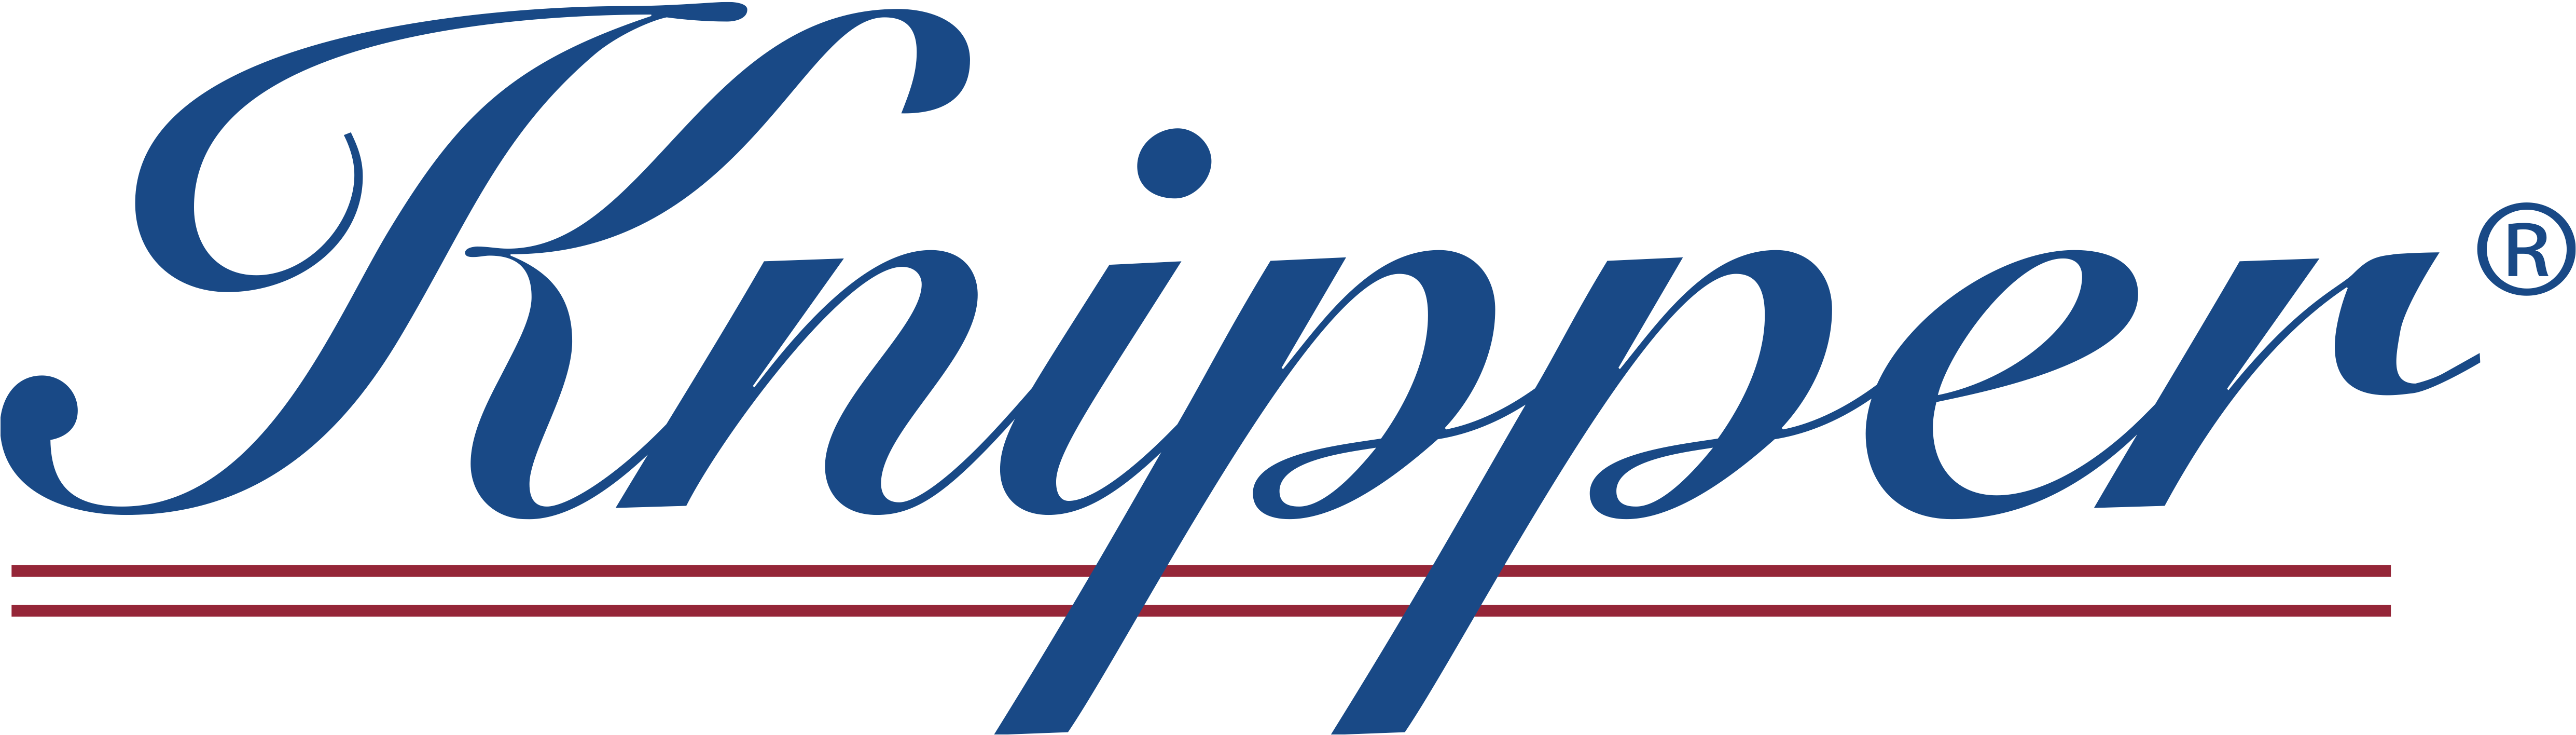 Knipper logo.png